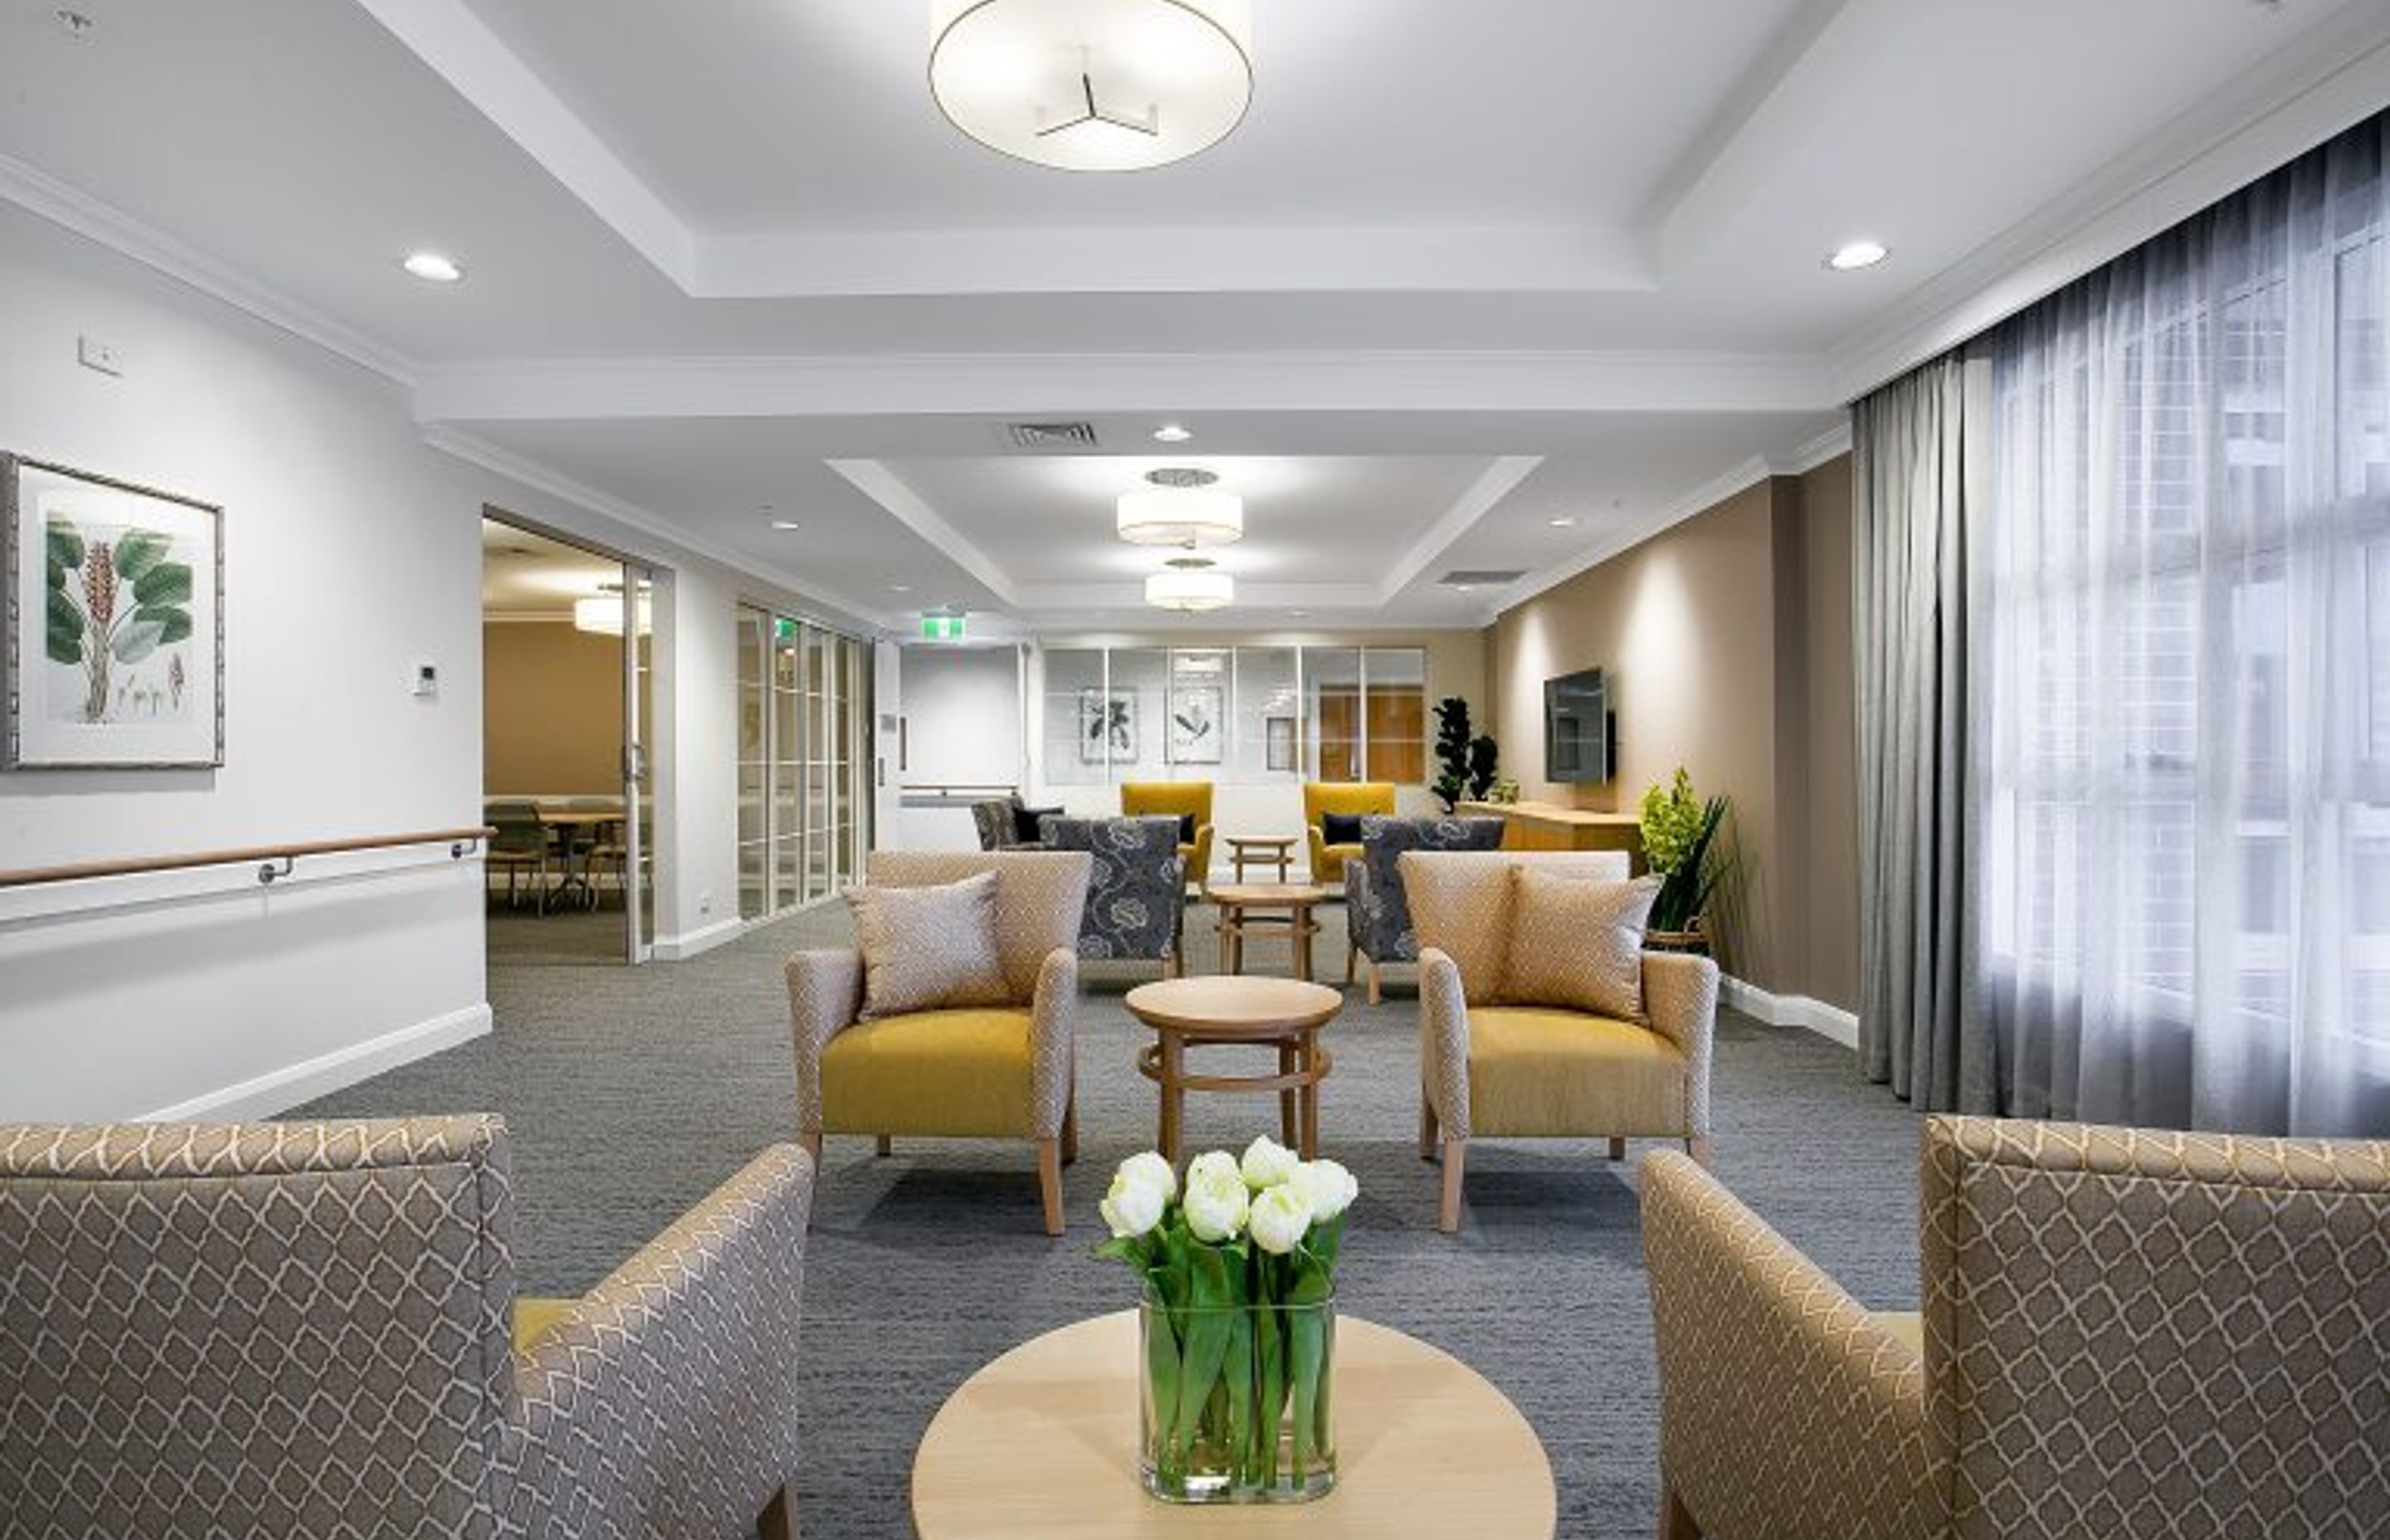  10 Interesting Things You Need to Know About Aged Care Interior Design